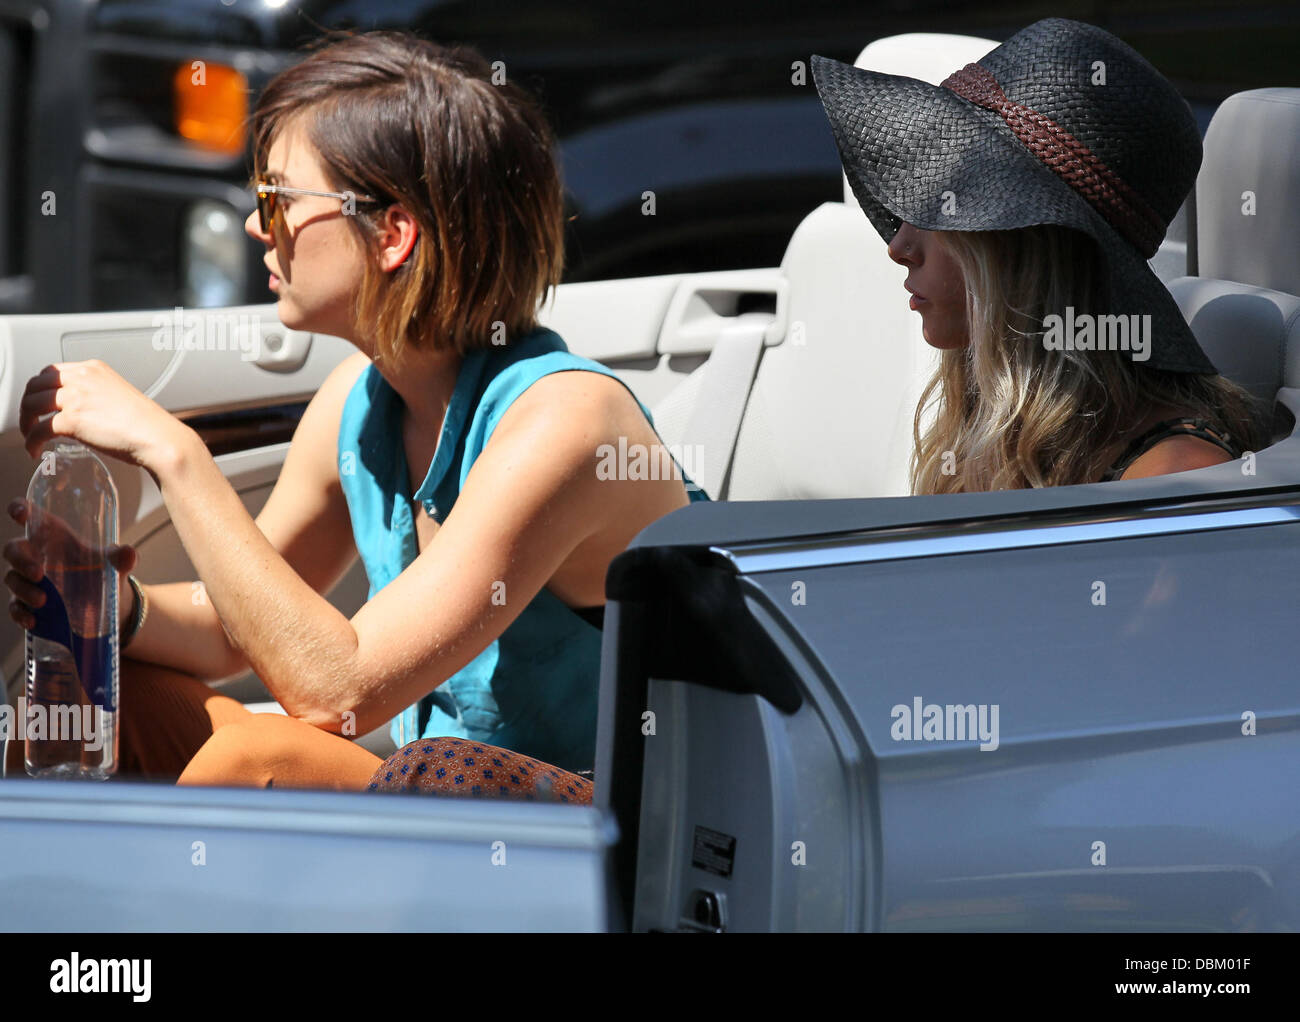 Jessica Stroup and Gillian Zinser  Cast members of the television show '90210' filming on location in Beverly Hills  Los Angeles, California, USA - 11.07.11 Stock Photo